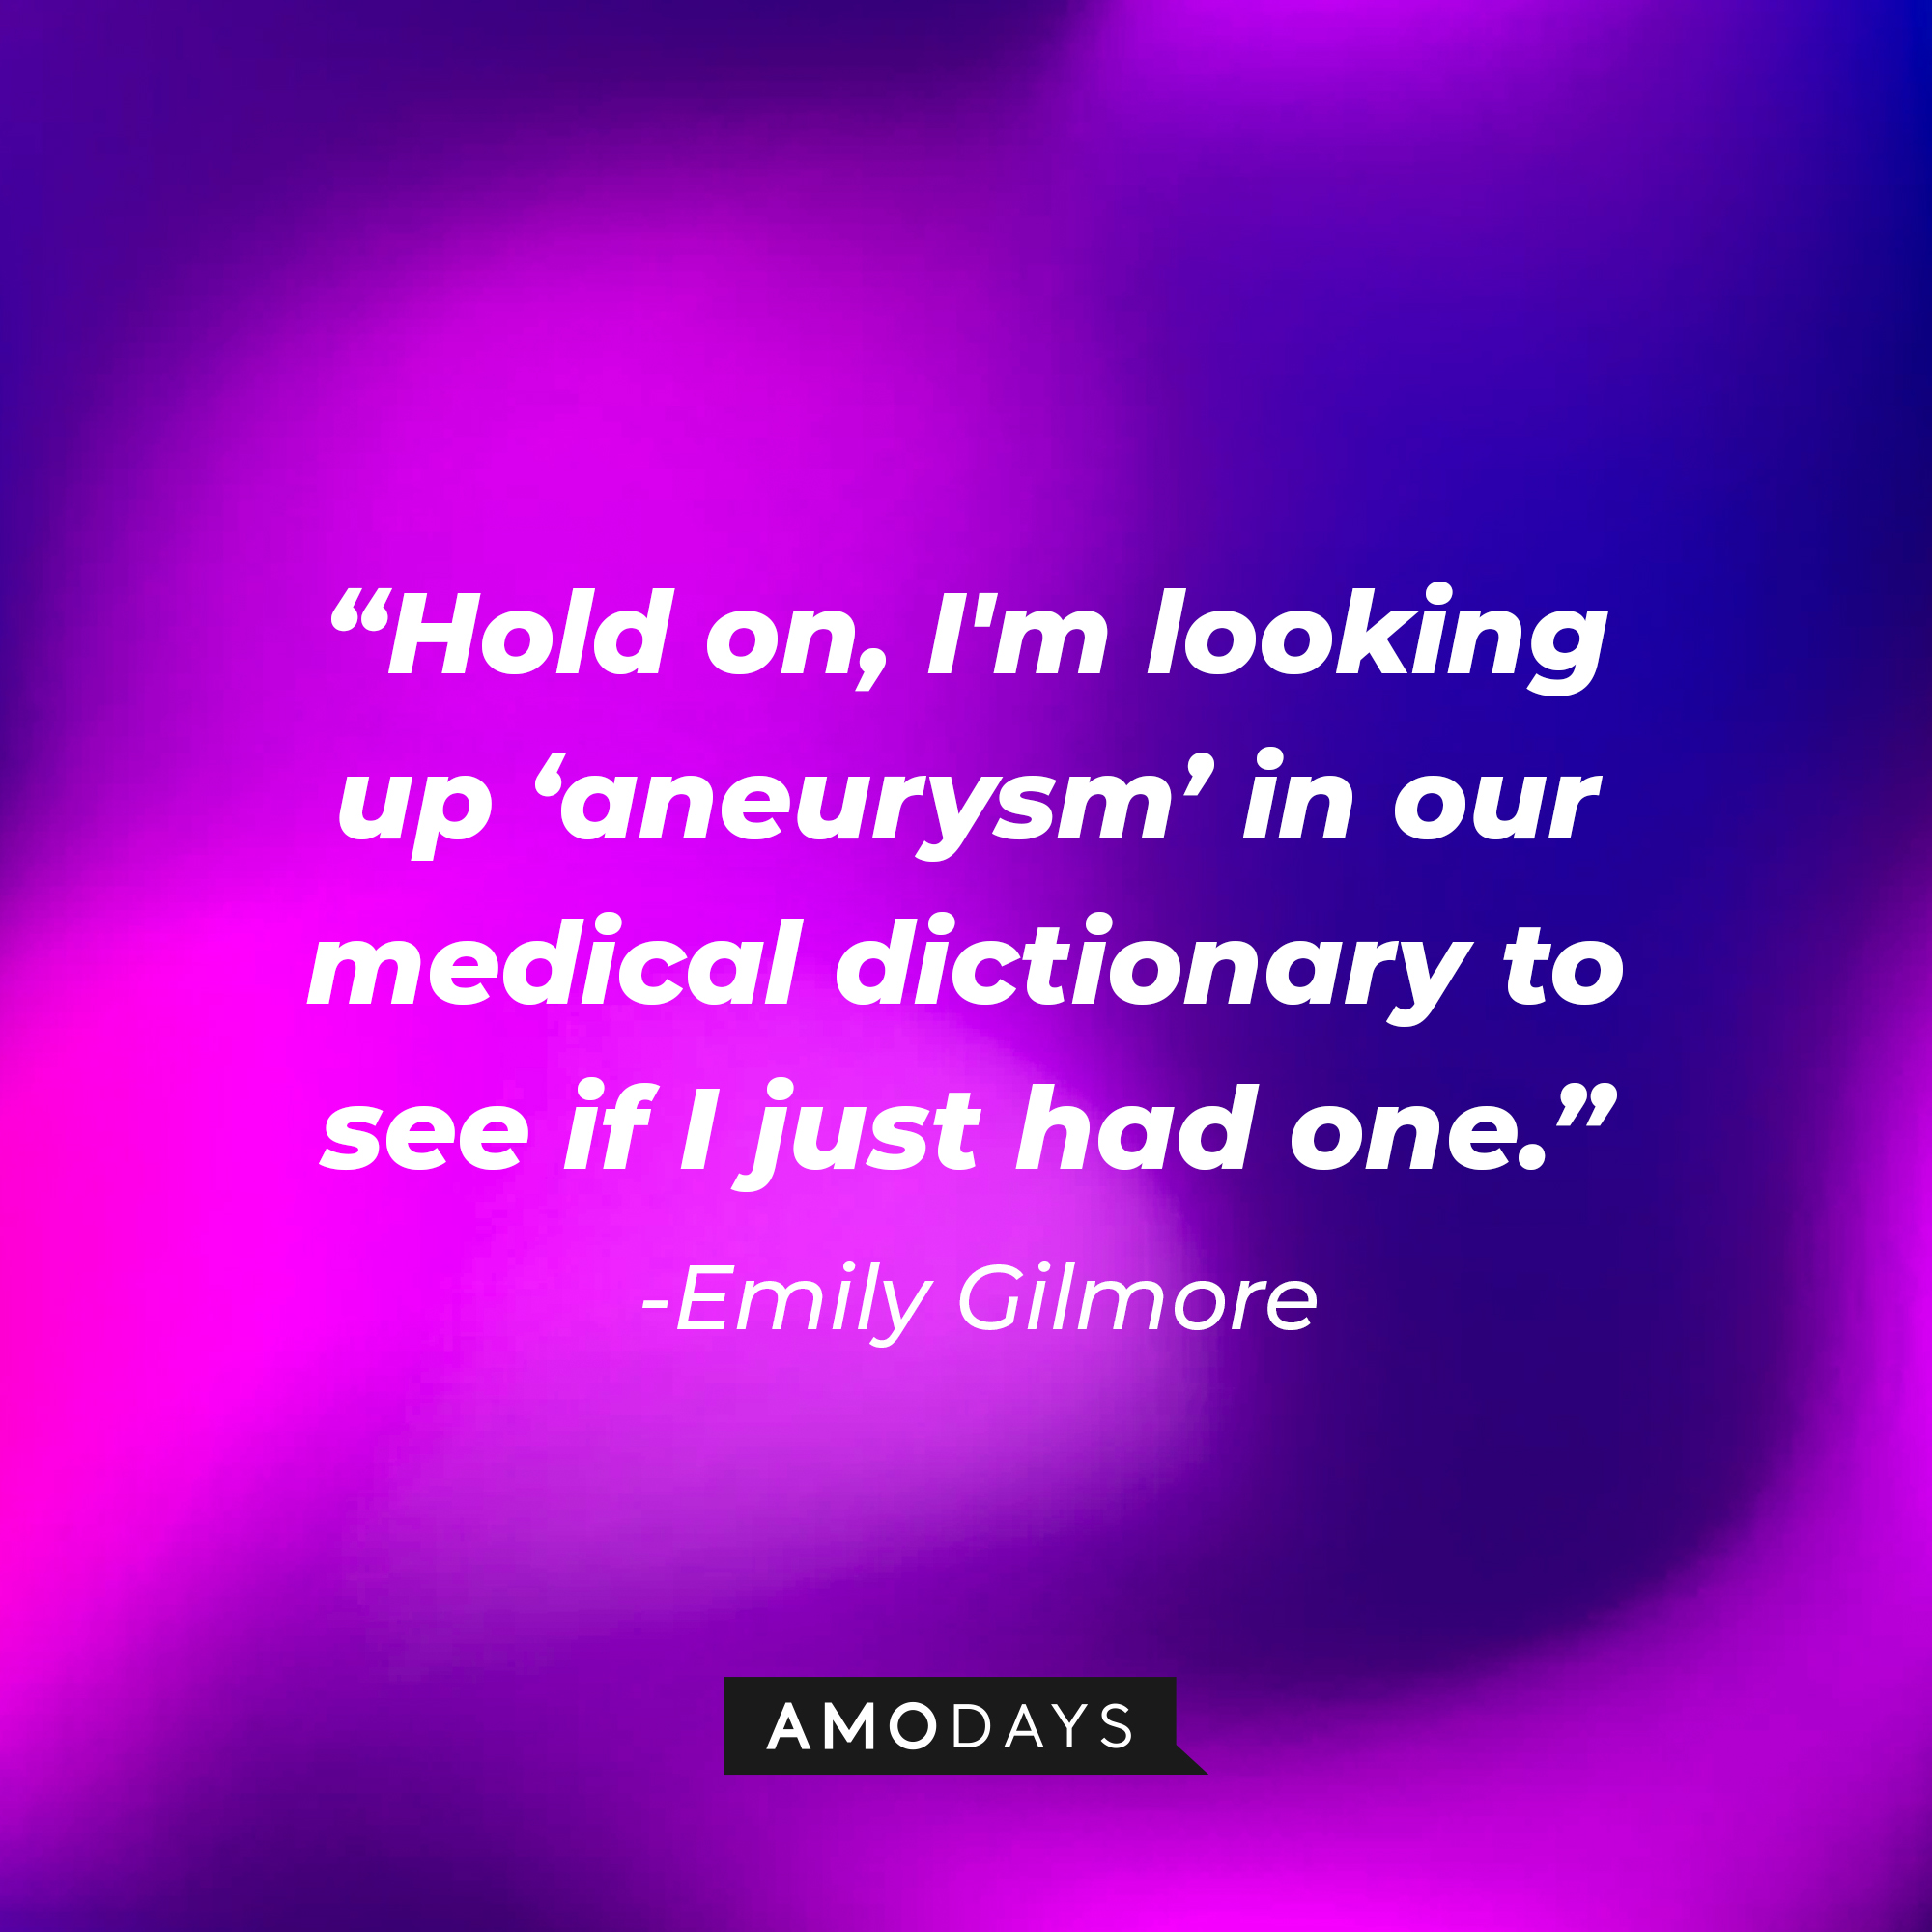 Emily Gilmore's quote: “Hold on, I'm looking up 'aneurysm' in our medical dictionary to see if I just had one." | Source: Amodays